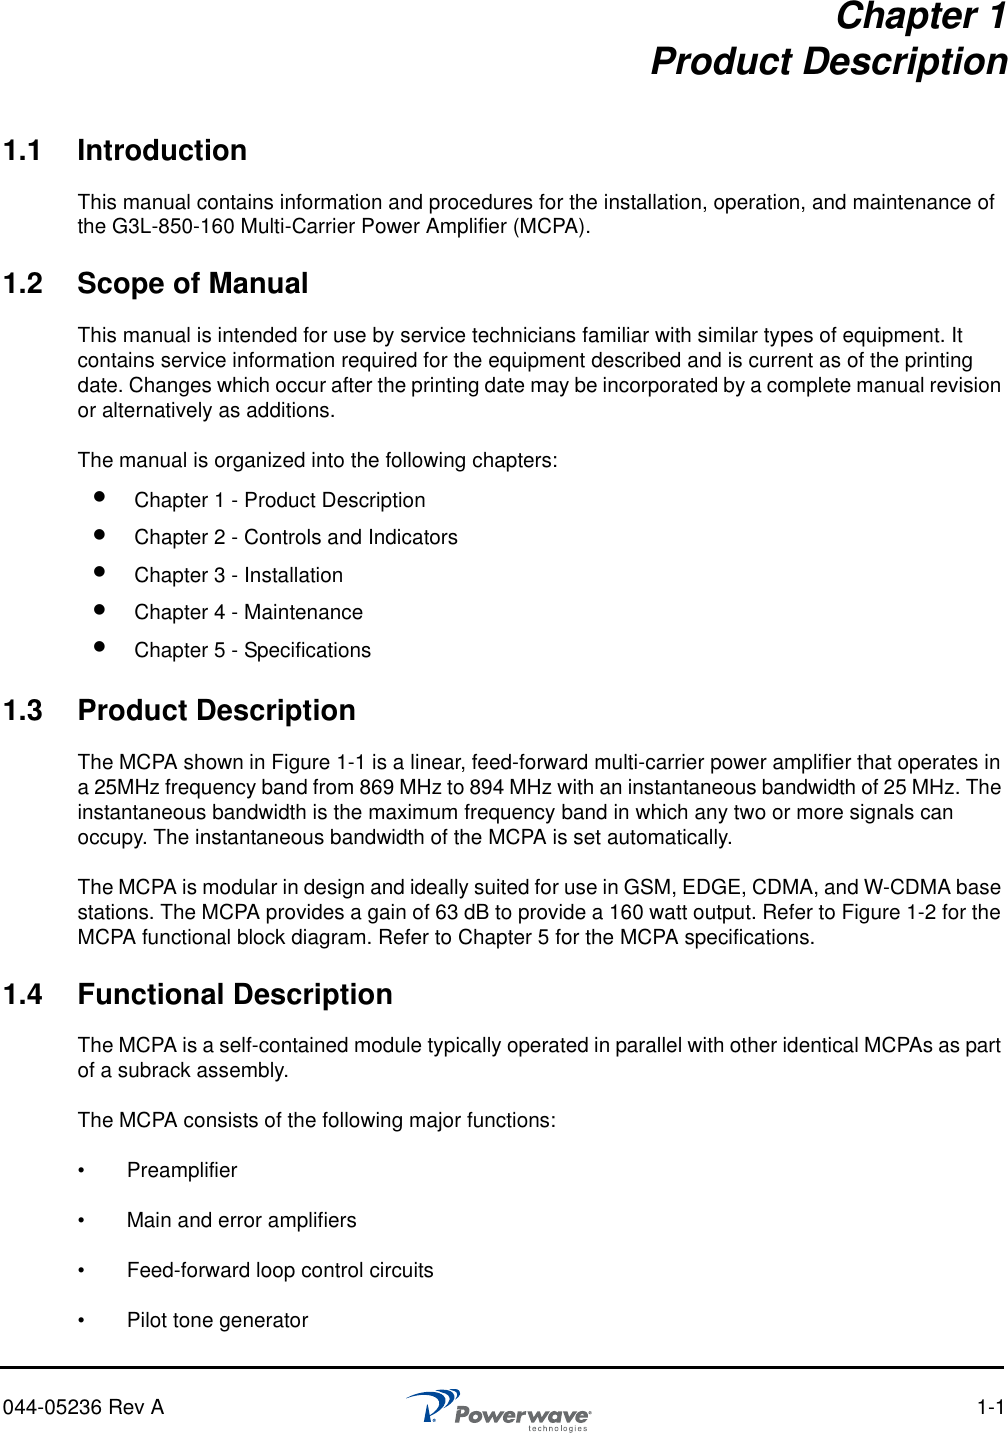 044-05236 Rev A 1-1Chapter 1Product Description1.1 IntroductionThis manual contains information and procedures for the installation, operation, and maintenance of the G3L-850-160 Multi-Carrier Power Amplifier (MCPA).1.2 Scope of ManualThis manual is intended for use by service technicians familiar with similar types of equipment. It contains service information required for the equipment described and is current as of the printing date. Changes which occur after the printing date may be incorporated by a complete manual revision or alternatively as additions.The manual is organized into the following chapters:1.3 Product DescriptionThe MCPA shown in Figure 1-1 is a linear, feed-forward multi-carrier power amplifier that operates in a 25MHz frequency band from 869 MHz to 894 MHz with an instantaneous bandwidth of 25 MHz. The instantaneous bandwidth is the maximum frequency band in which any two or more signals can occupy. The instantaneous bandwidth of the MCPA is set automatically.The MCPA is modular in design and ideally suited for use in GSM, EDGE, CDMA, and W-CDMA base stations. The MCPA provides a gain of 63 dB to provide a 160 watt output. Refer to Figure 1-2 for the MCPA functional block diagram. Refer to Chapter 5 for the MCPA specifications.1.4 Functional DescriptionThe MCPA is a self-contained module typically operated in parallel with other identical MCPAs as part of a subrack assembly. The MCPA consists of the following major functions:•   Preamplifier •   Main and error amplifiers•   Feed-forward loop control circuits•   Pilot tone generator Chapter 1 - Product Description Chapter 2 - Controls and Indicators Chapter 3 - Installation Chapter 4 - Maintenance Chapter 5 - Specifications